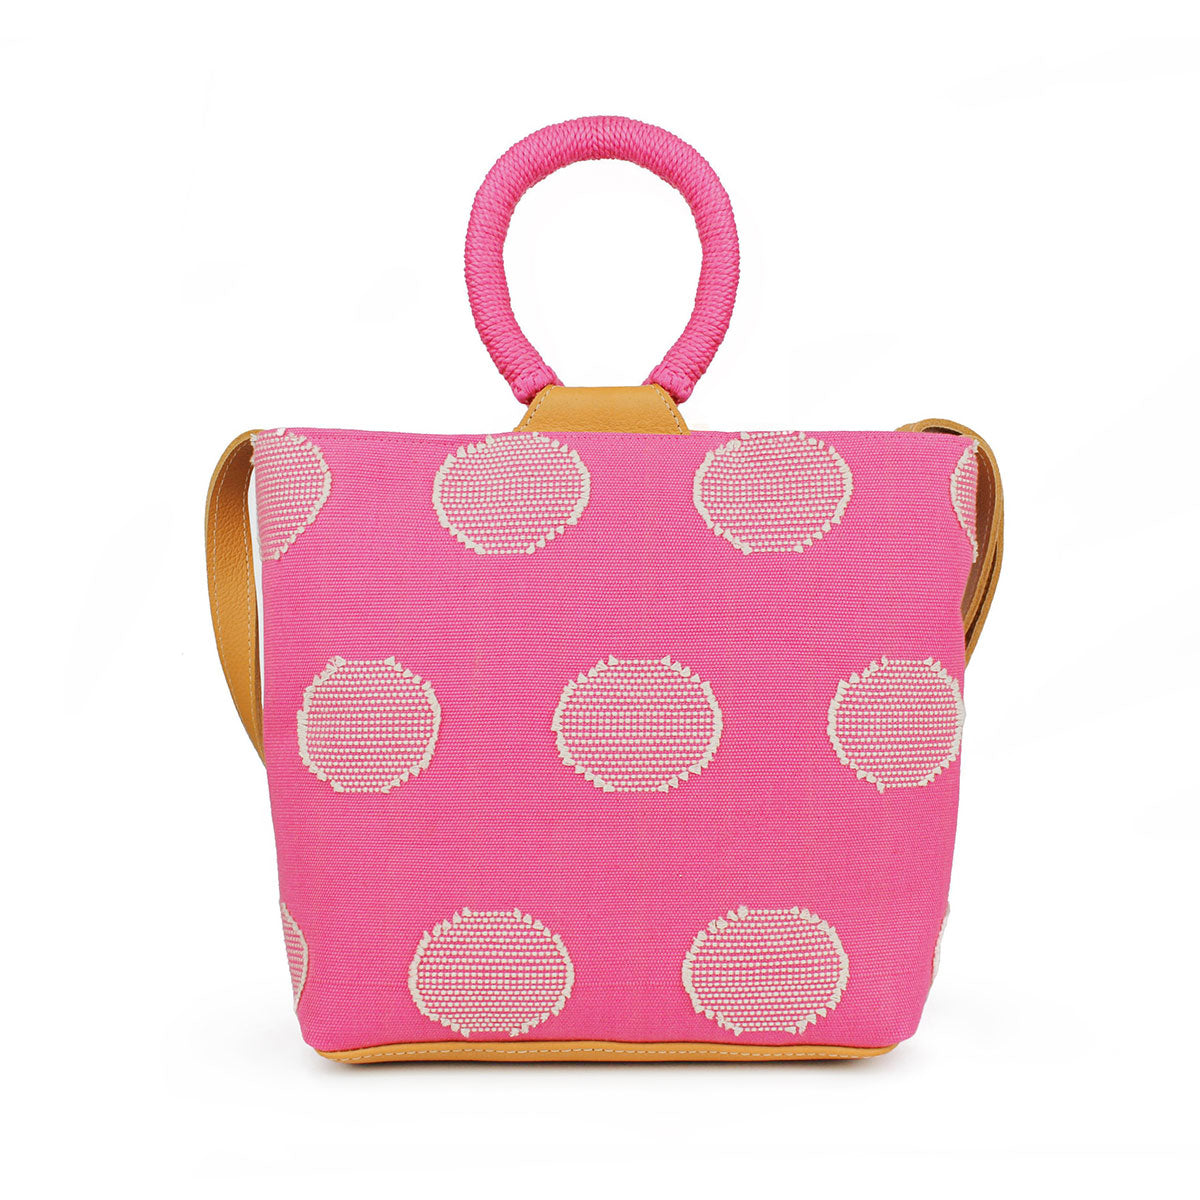 The hand woven artisan Dalila Midi Tote in Sunset Pink. It has rounded handles coiled in pink thread. The Sunset Pink pattern has white circles over a pink background.